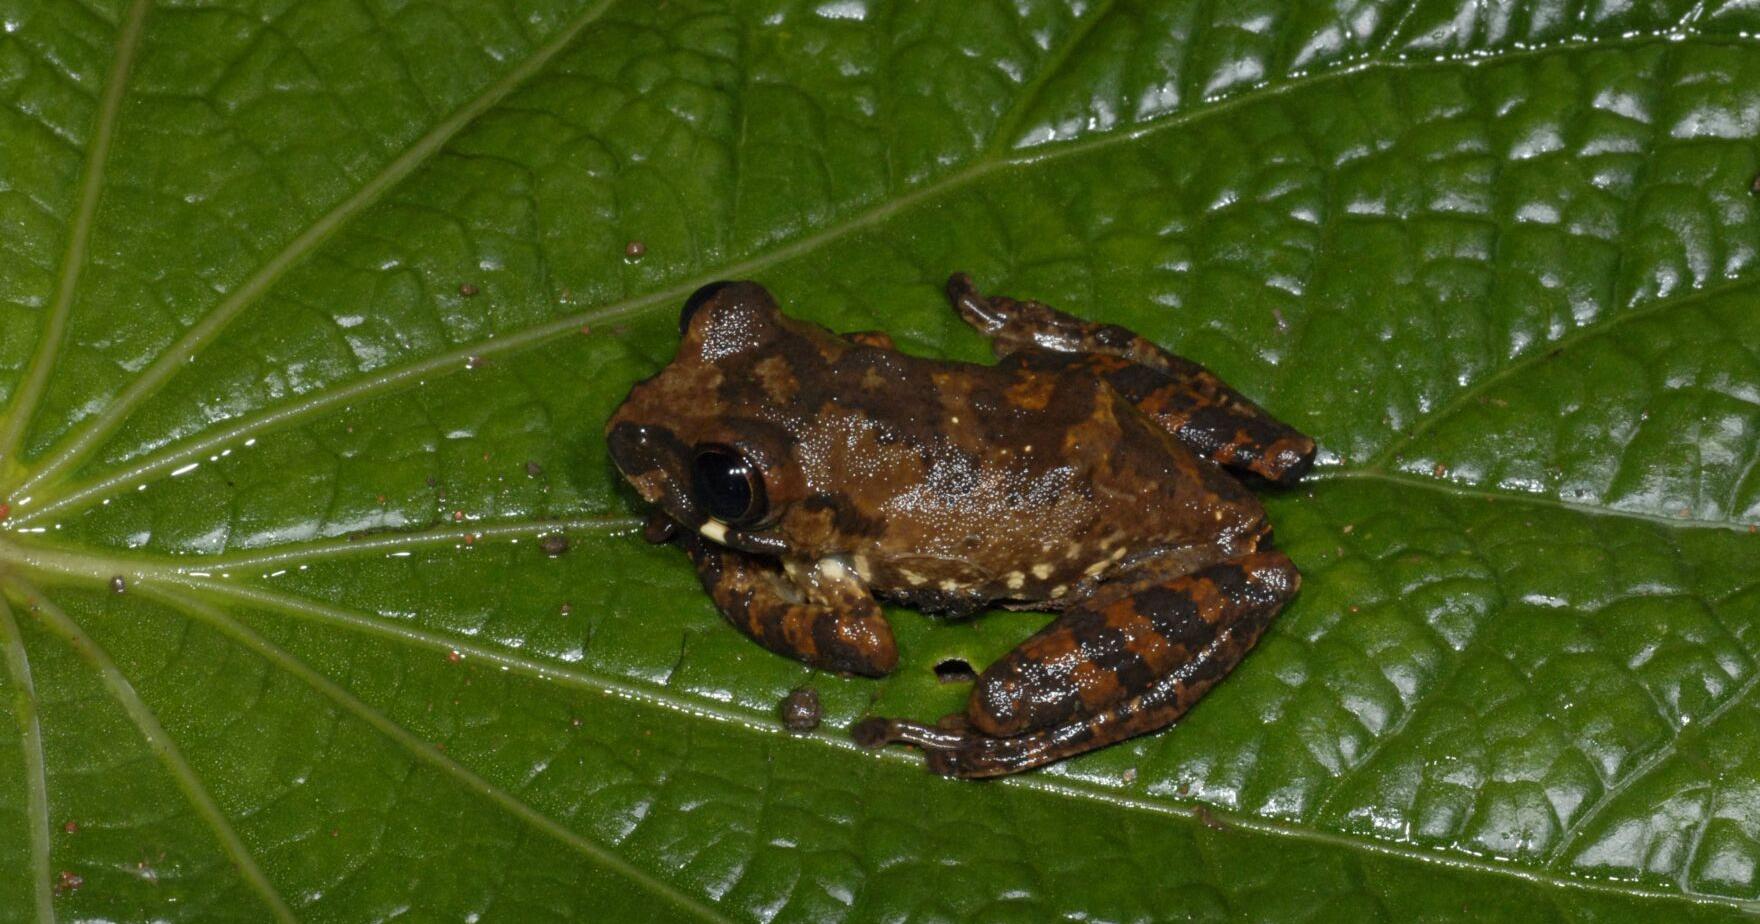 A killer fungus has spread in Africa, driving more amphibians to extinction